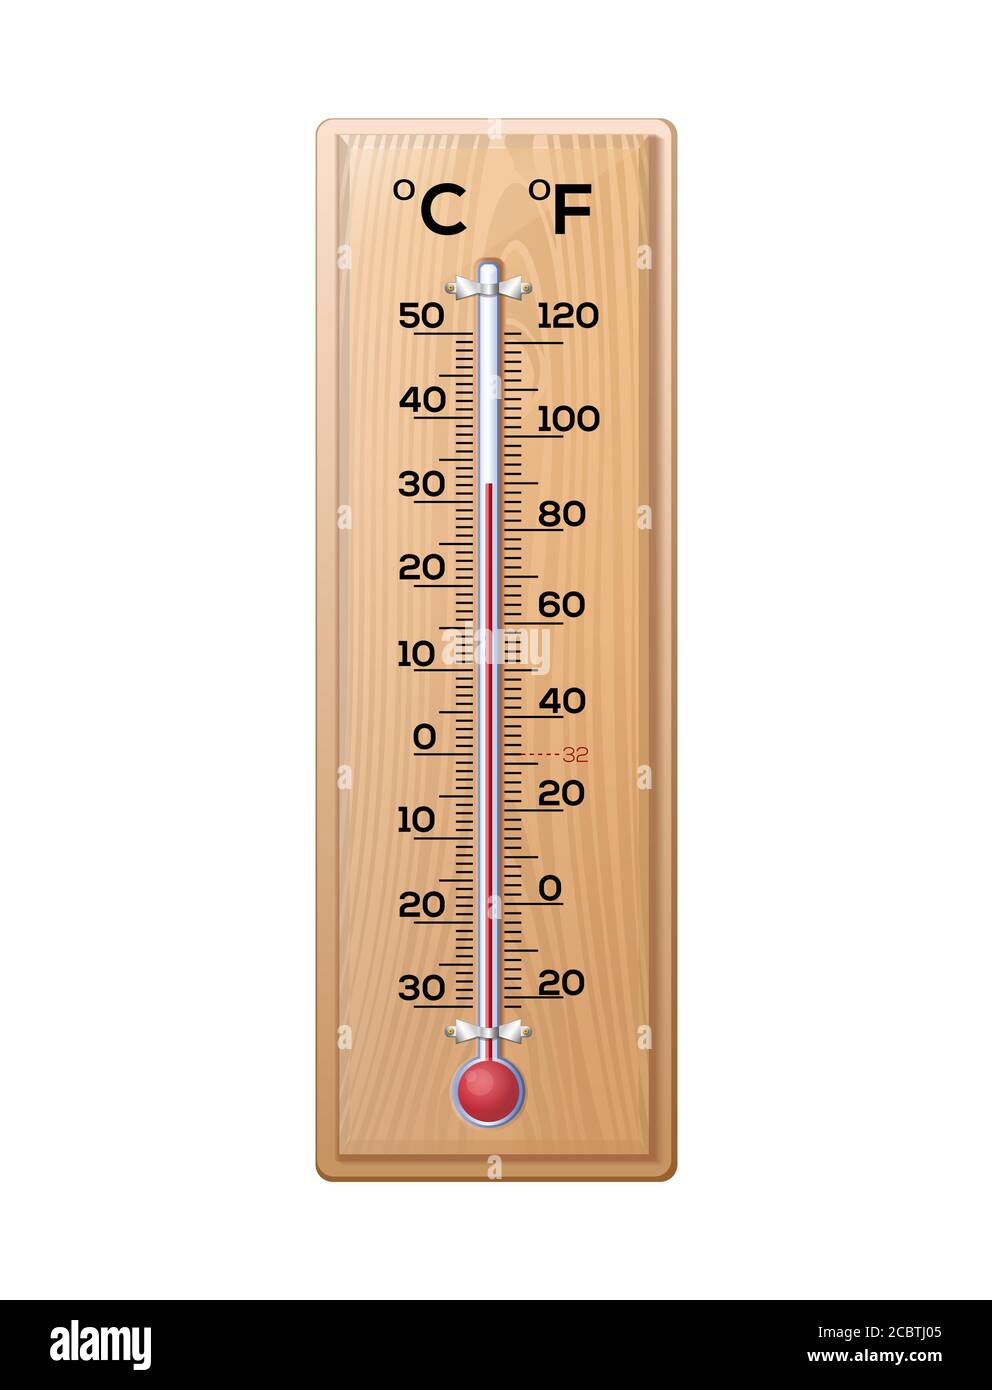 https://c8.alamy.com/comp/2CBTJ05/thermometer-to-measure-the-temperature-of-the-air-on-a-wooden-base-2CBTJ05.jpg